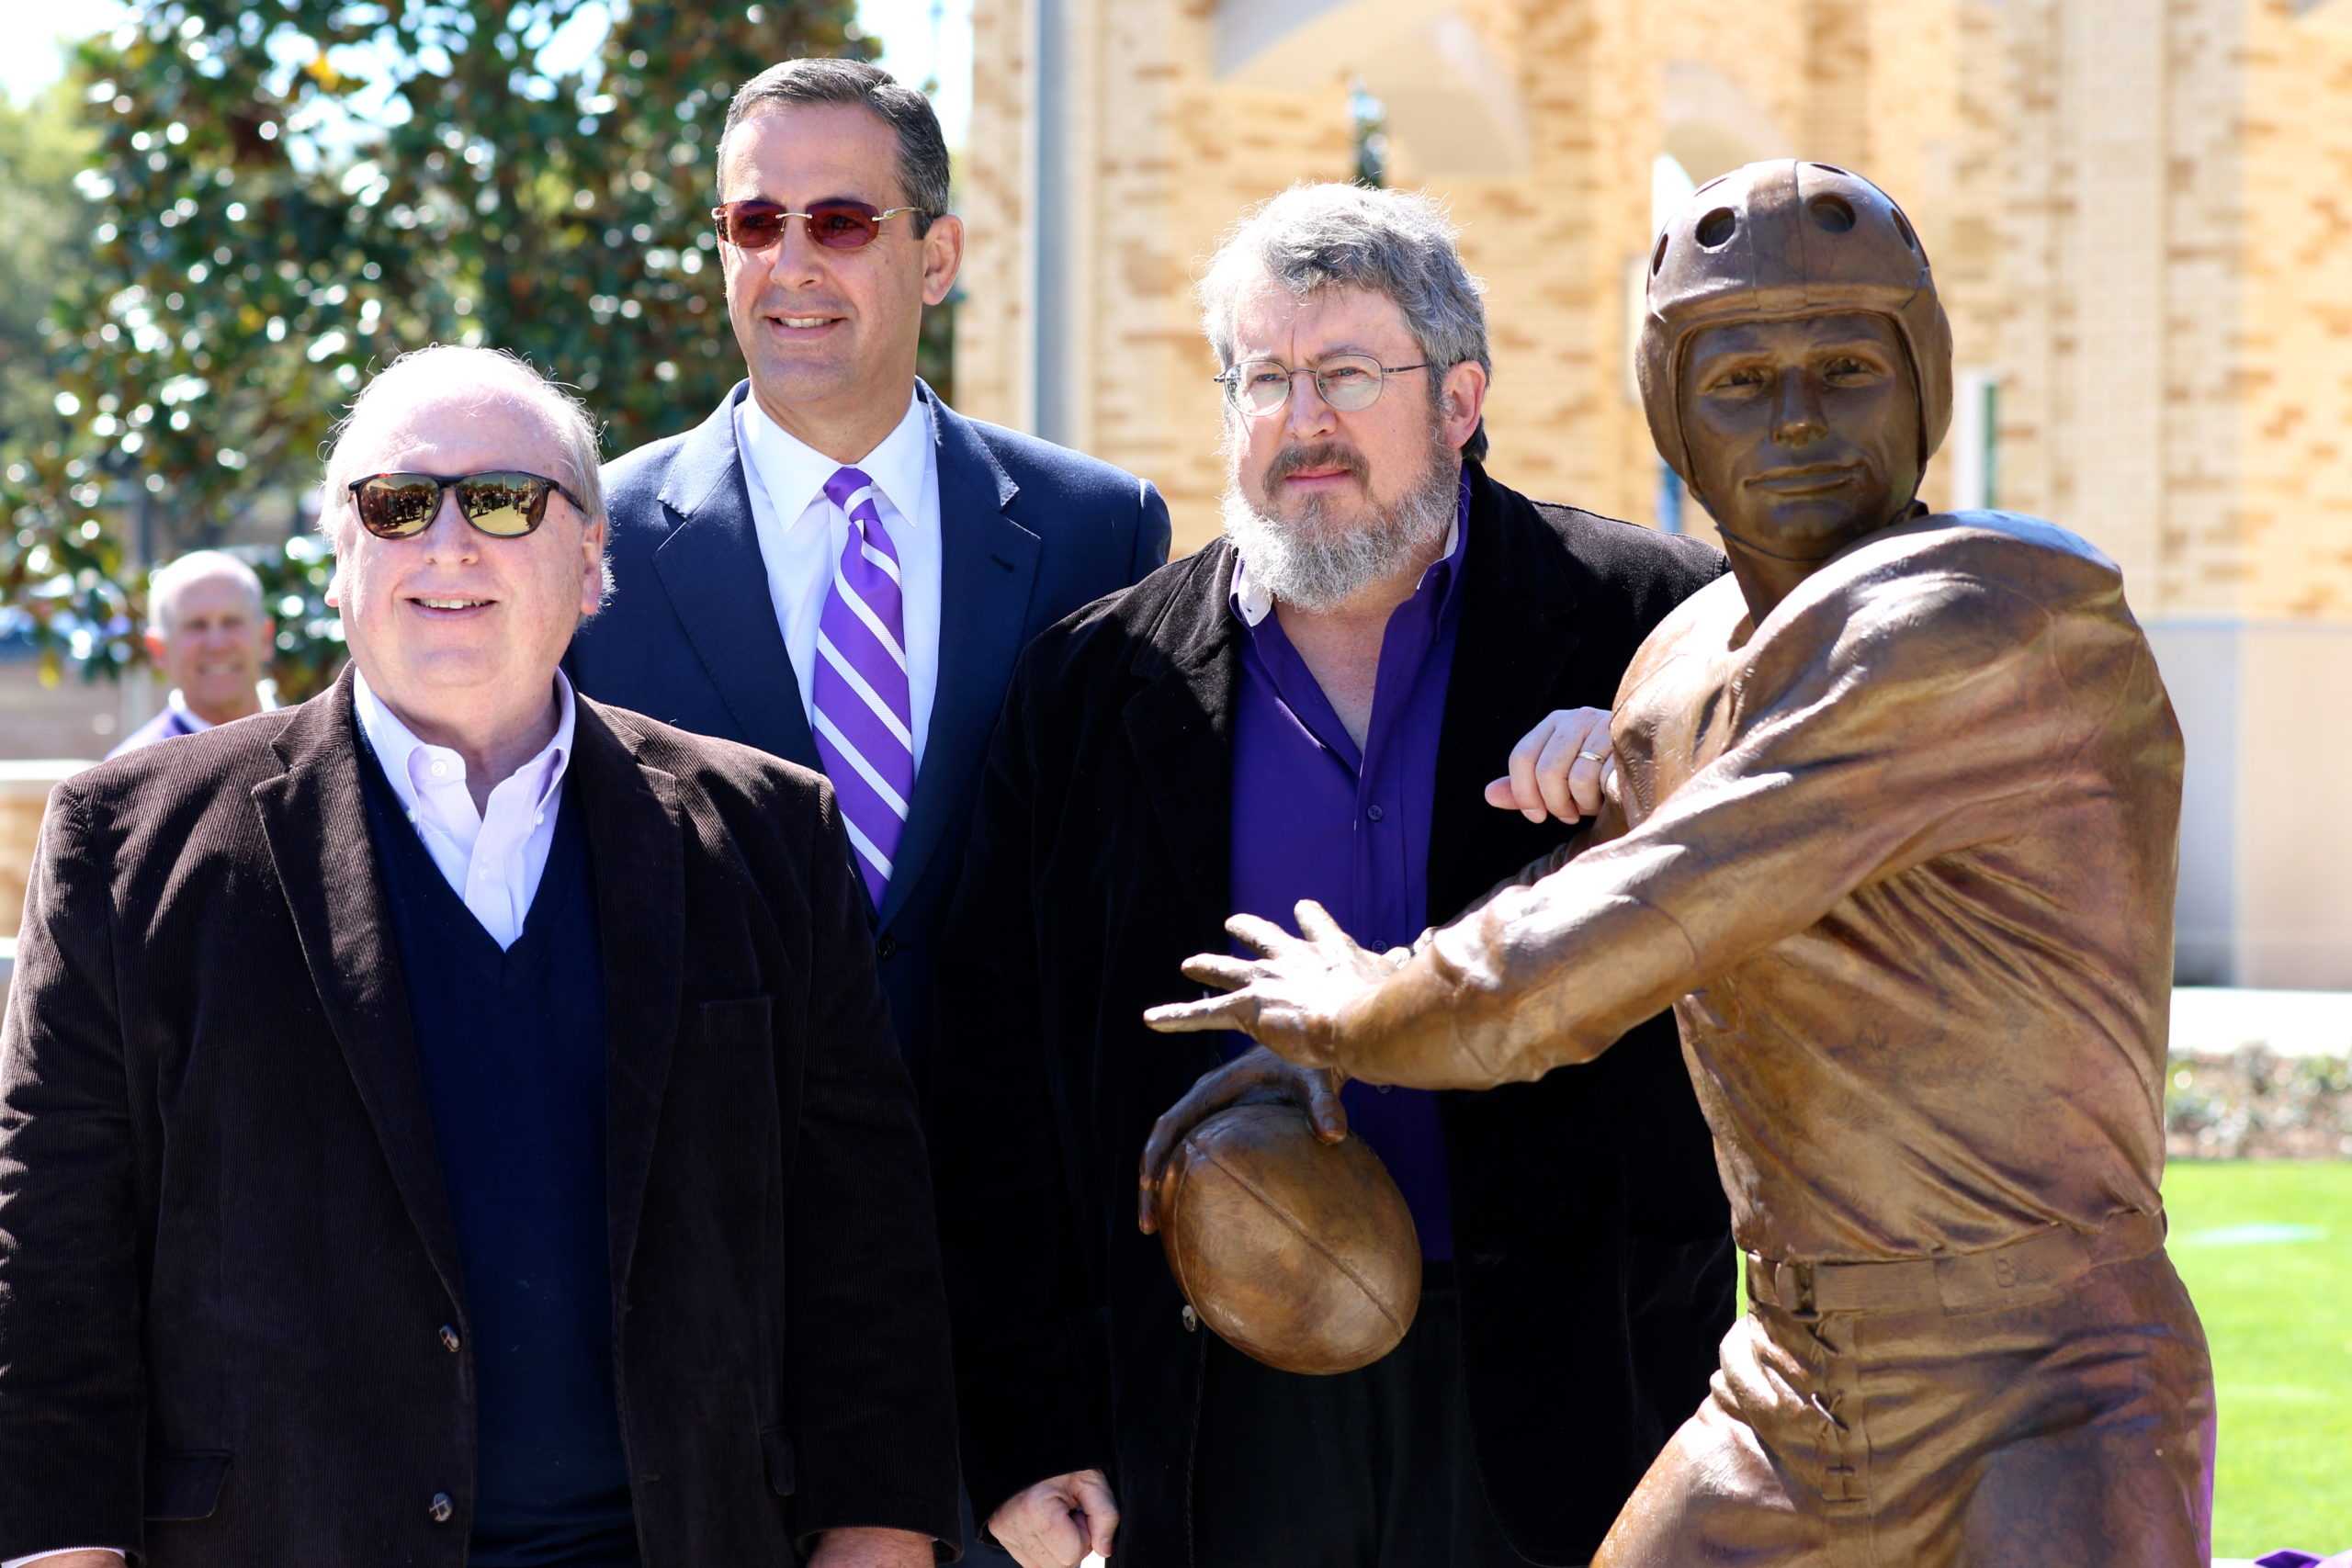 The+life+sized+statues+showcase+how+far+TCU+has+come+in+college+football.